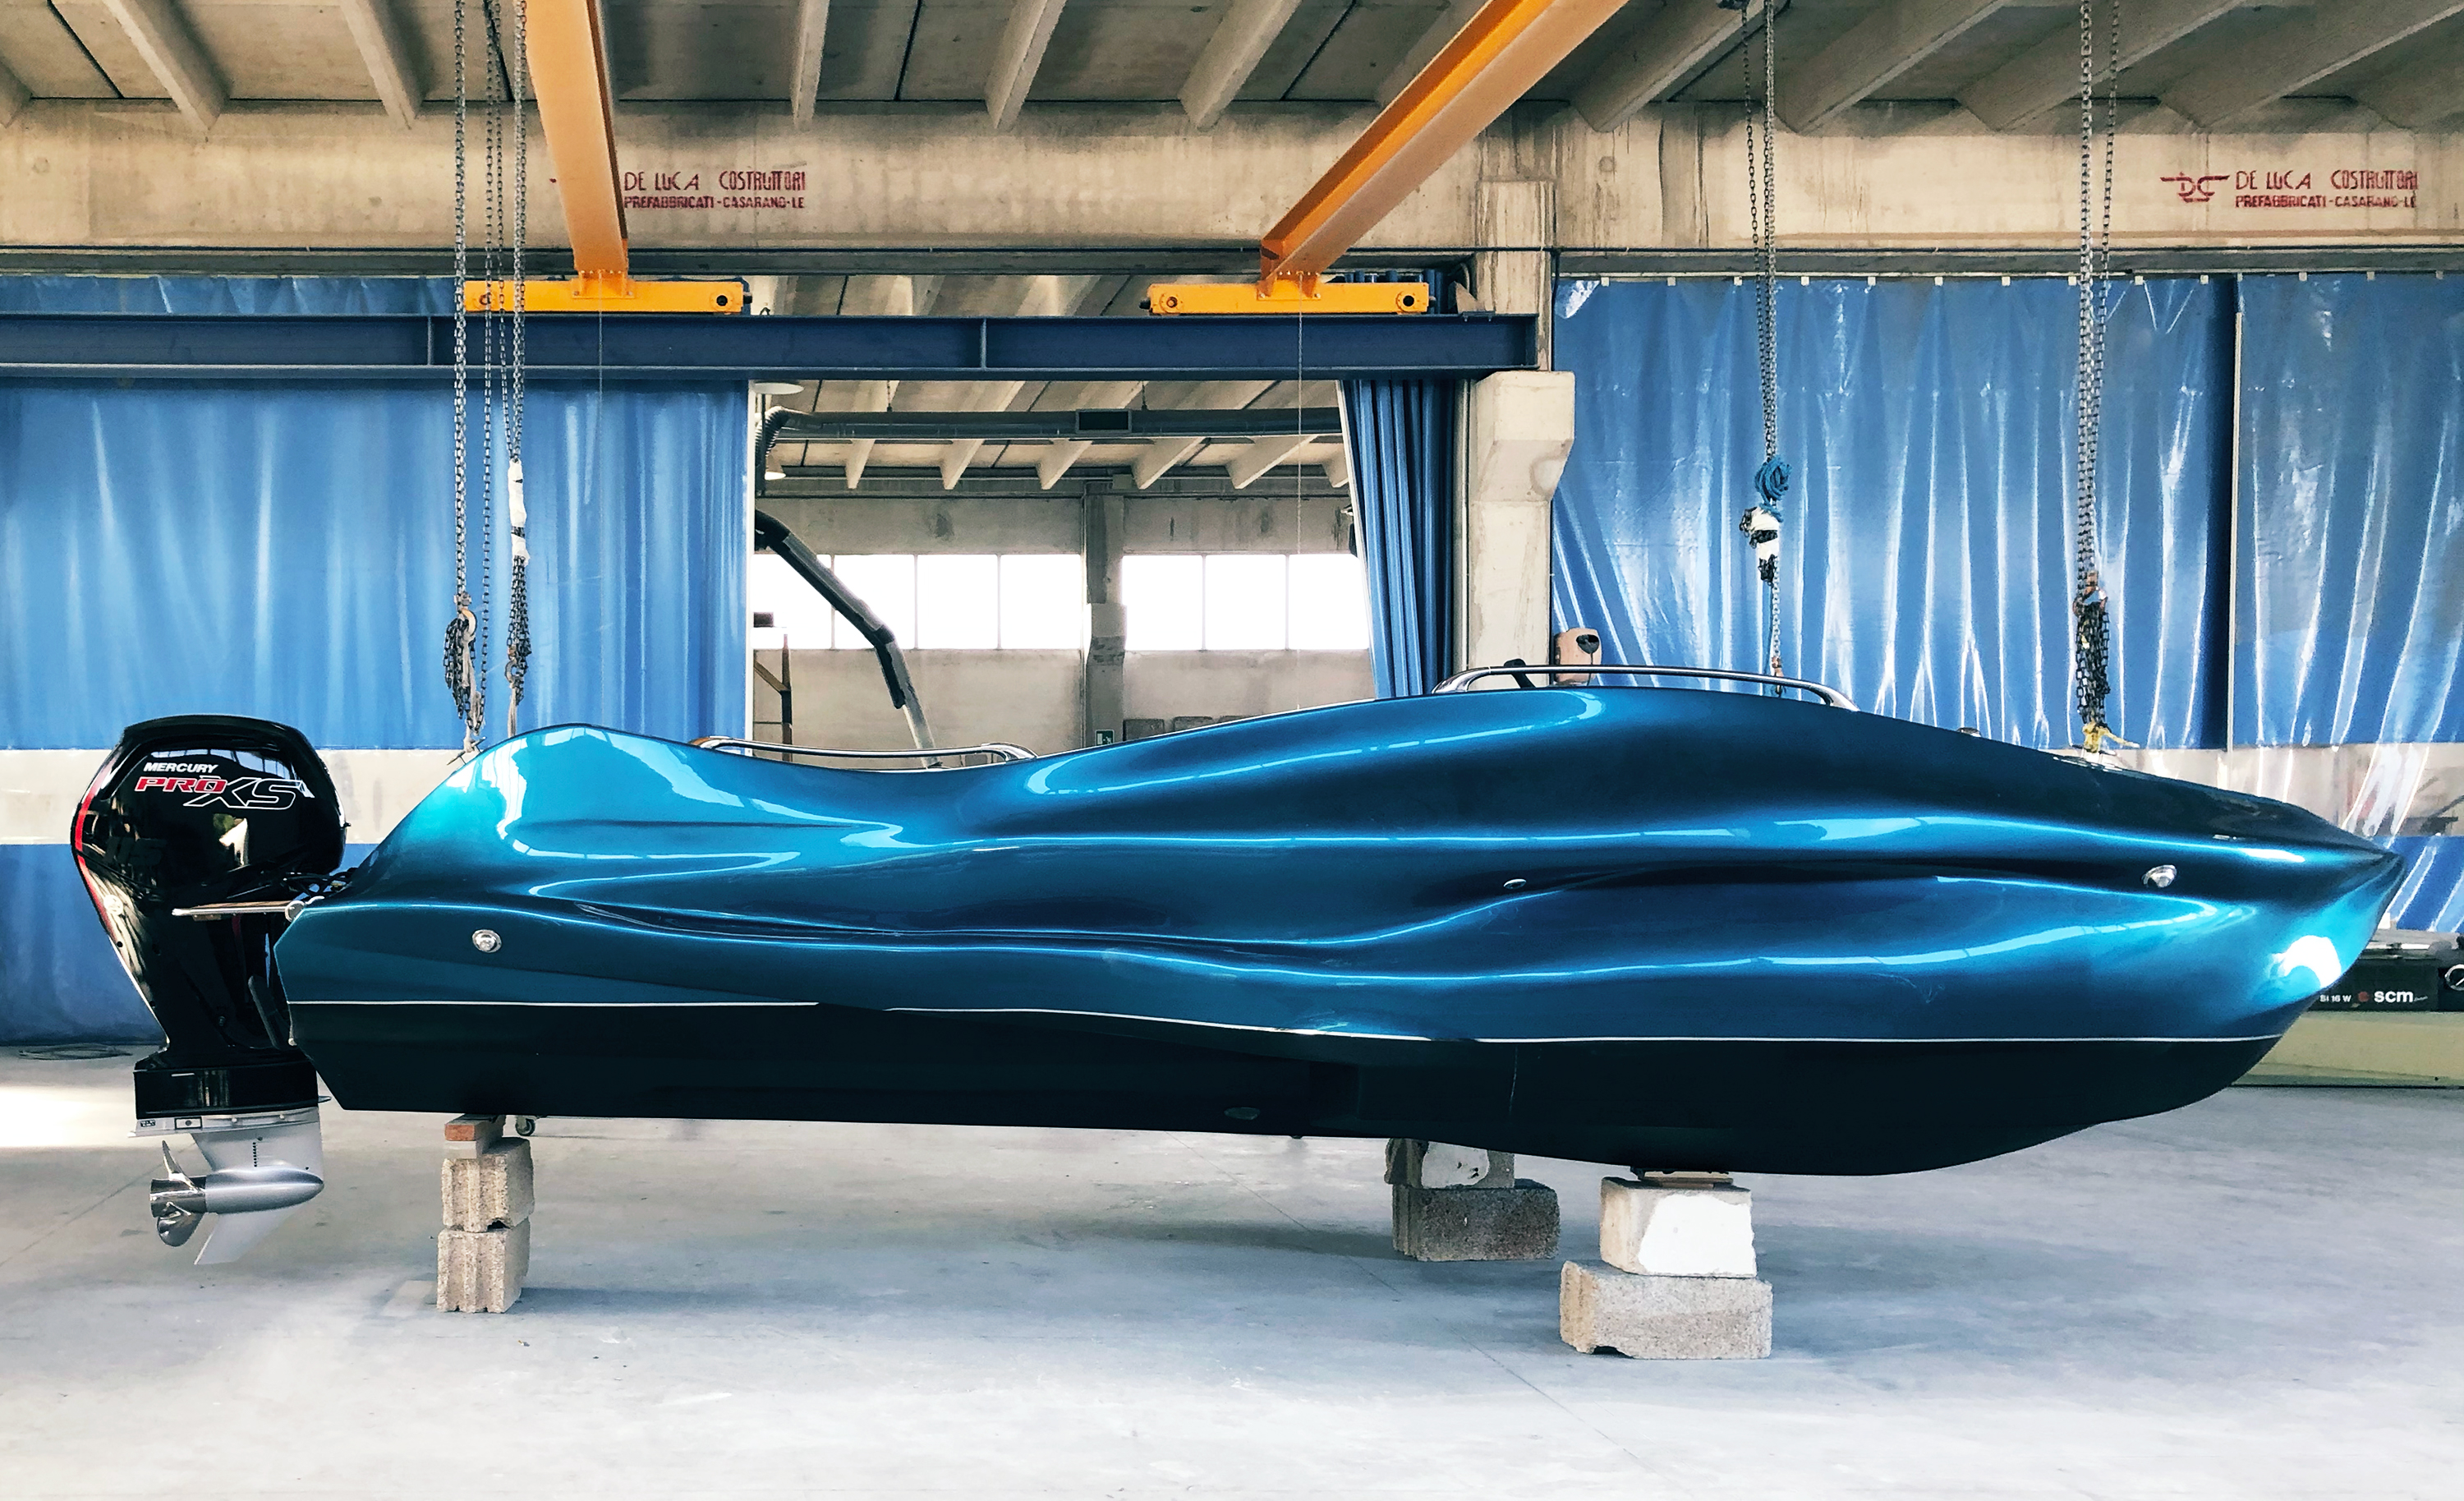 The MAMBO spans 6.5 meters by 2.5 meters and is printed in a continuous fiberglass thermoset material. Image via Moi Composites.